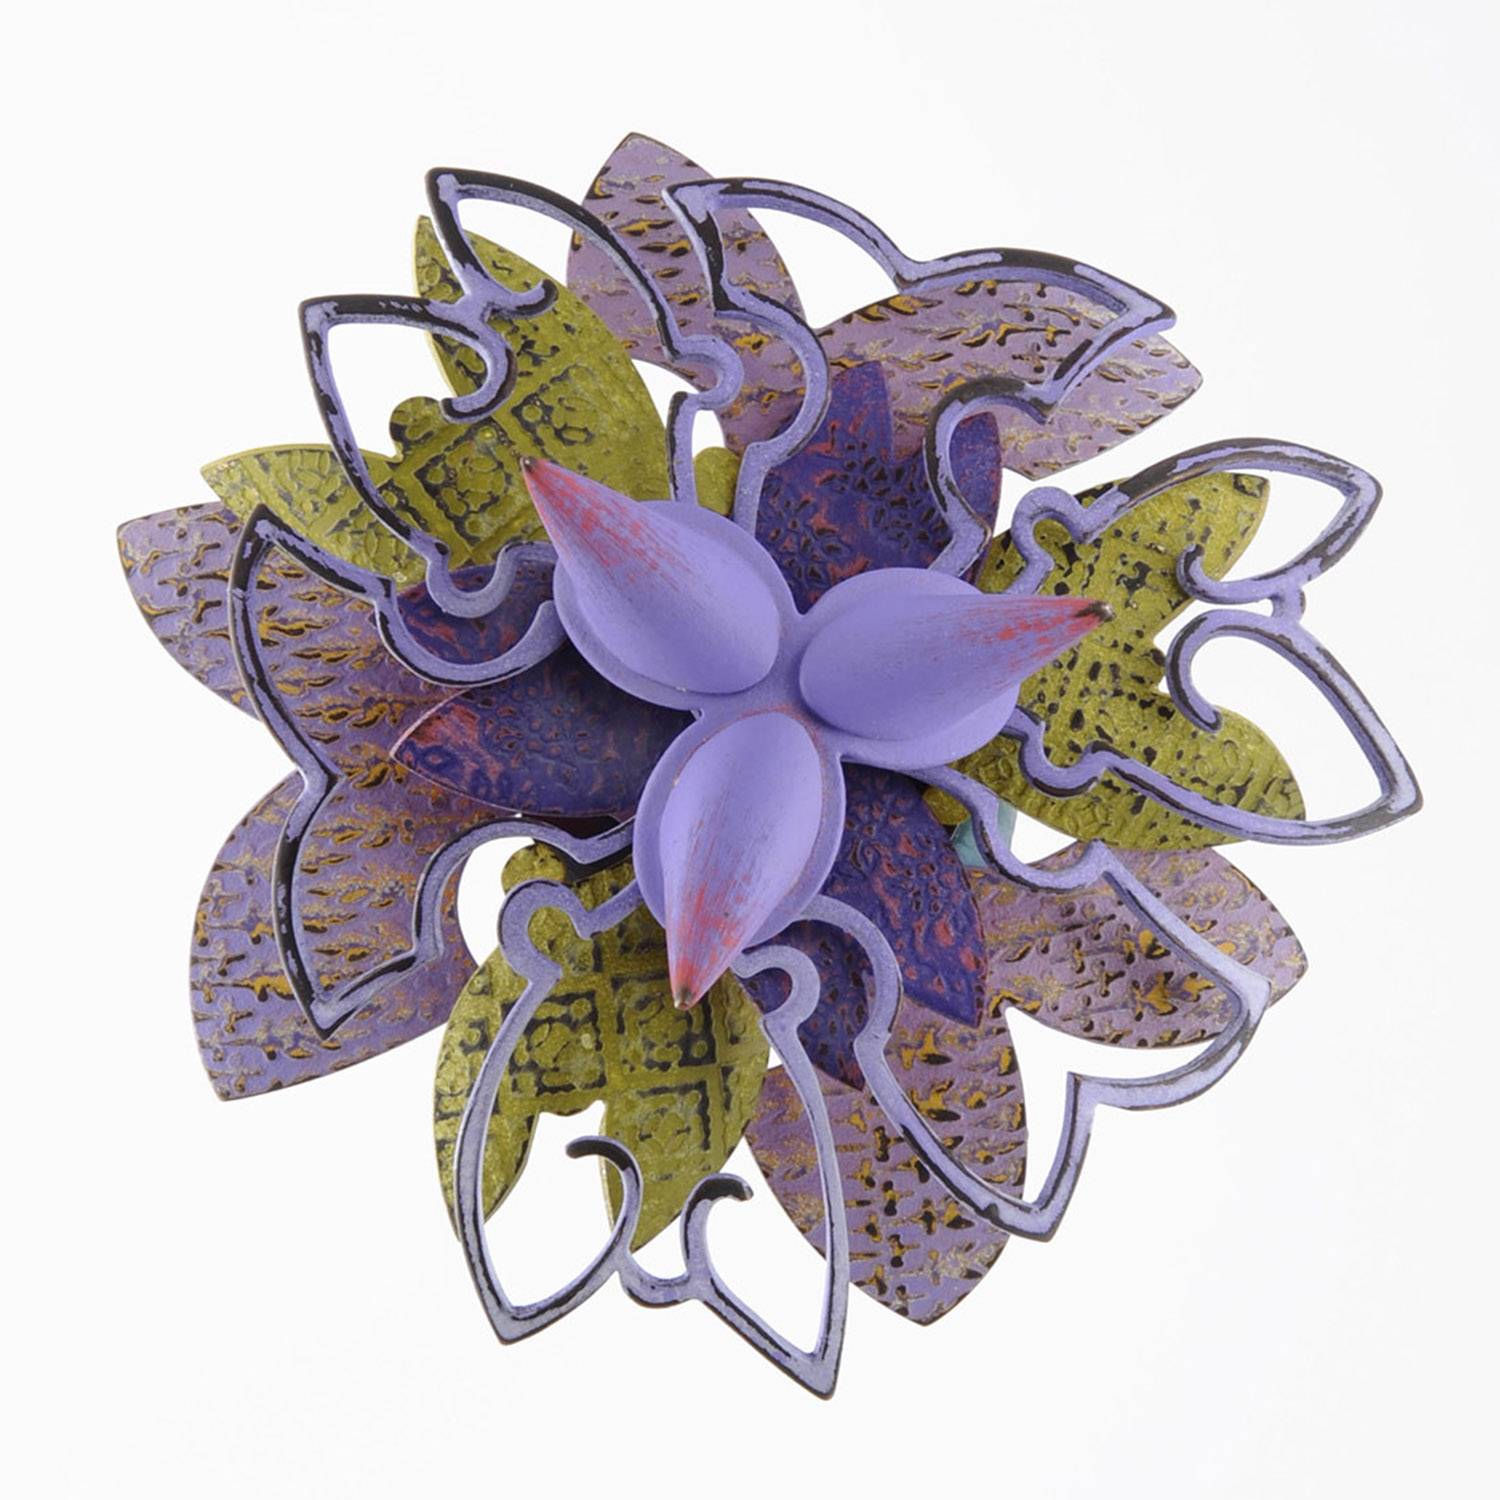 Rosette Brooch 20-15  |  2015  |  bronze, acrylic lacquer  |  4 x 4 x 1.25 inches  